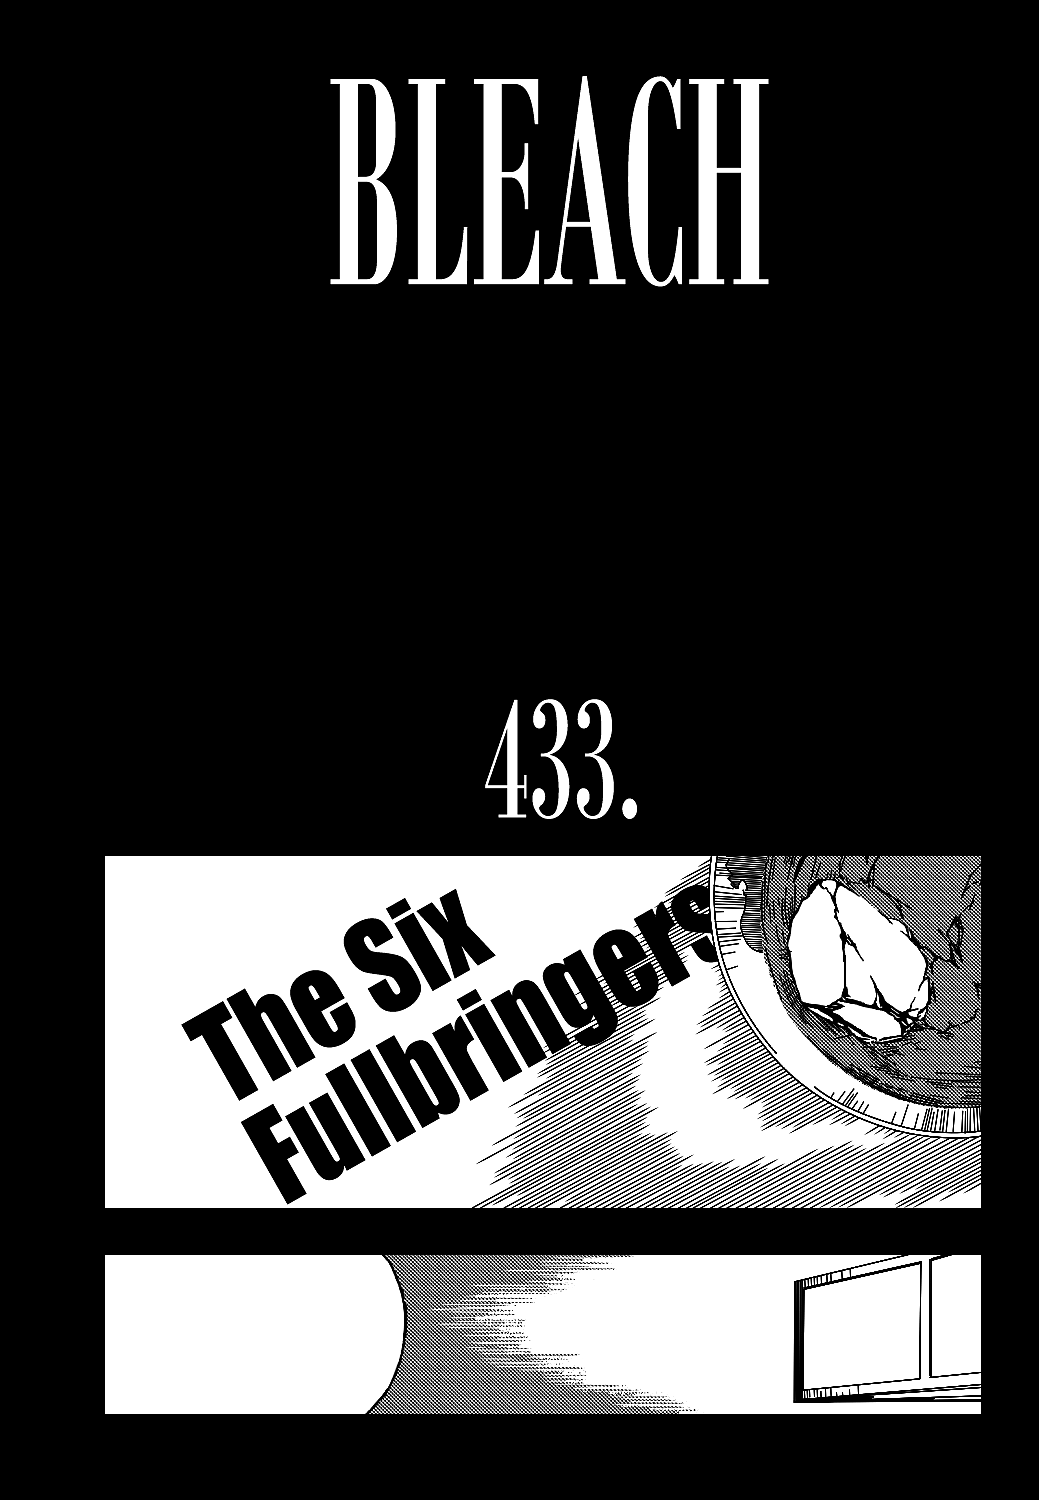 The Six Fullbringers - Bleach Wiki - Your guide to the Bleach manga and ...